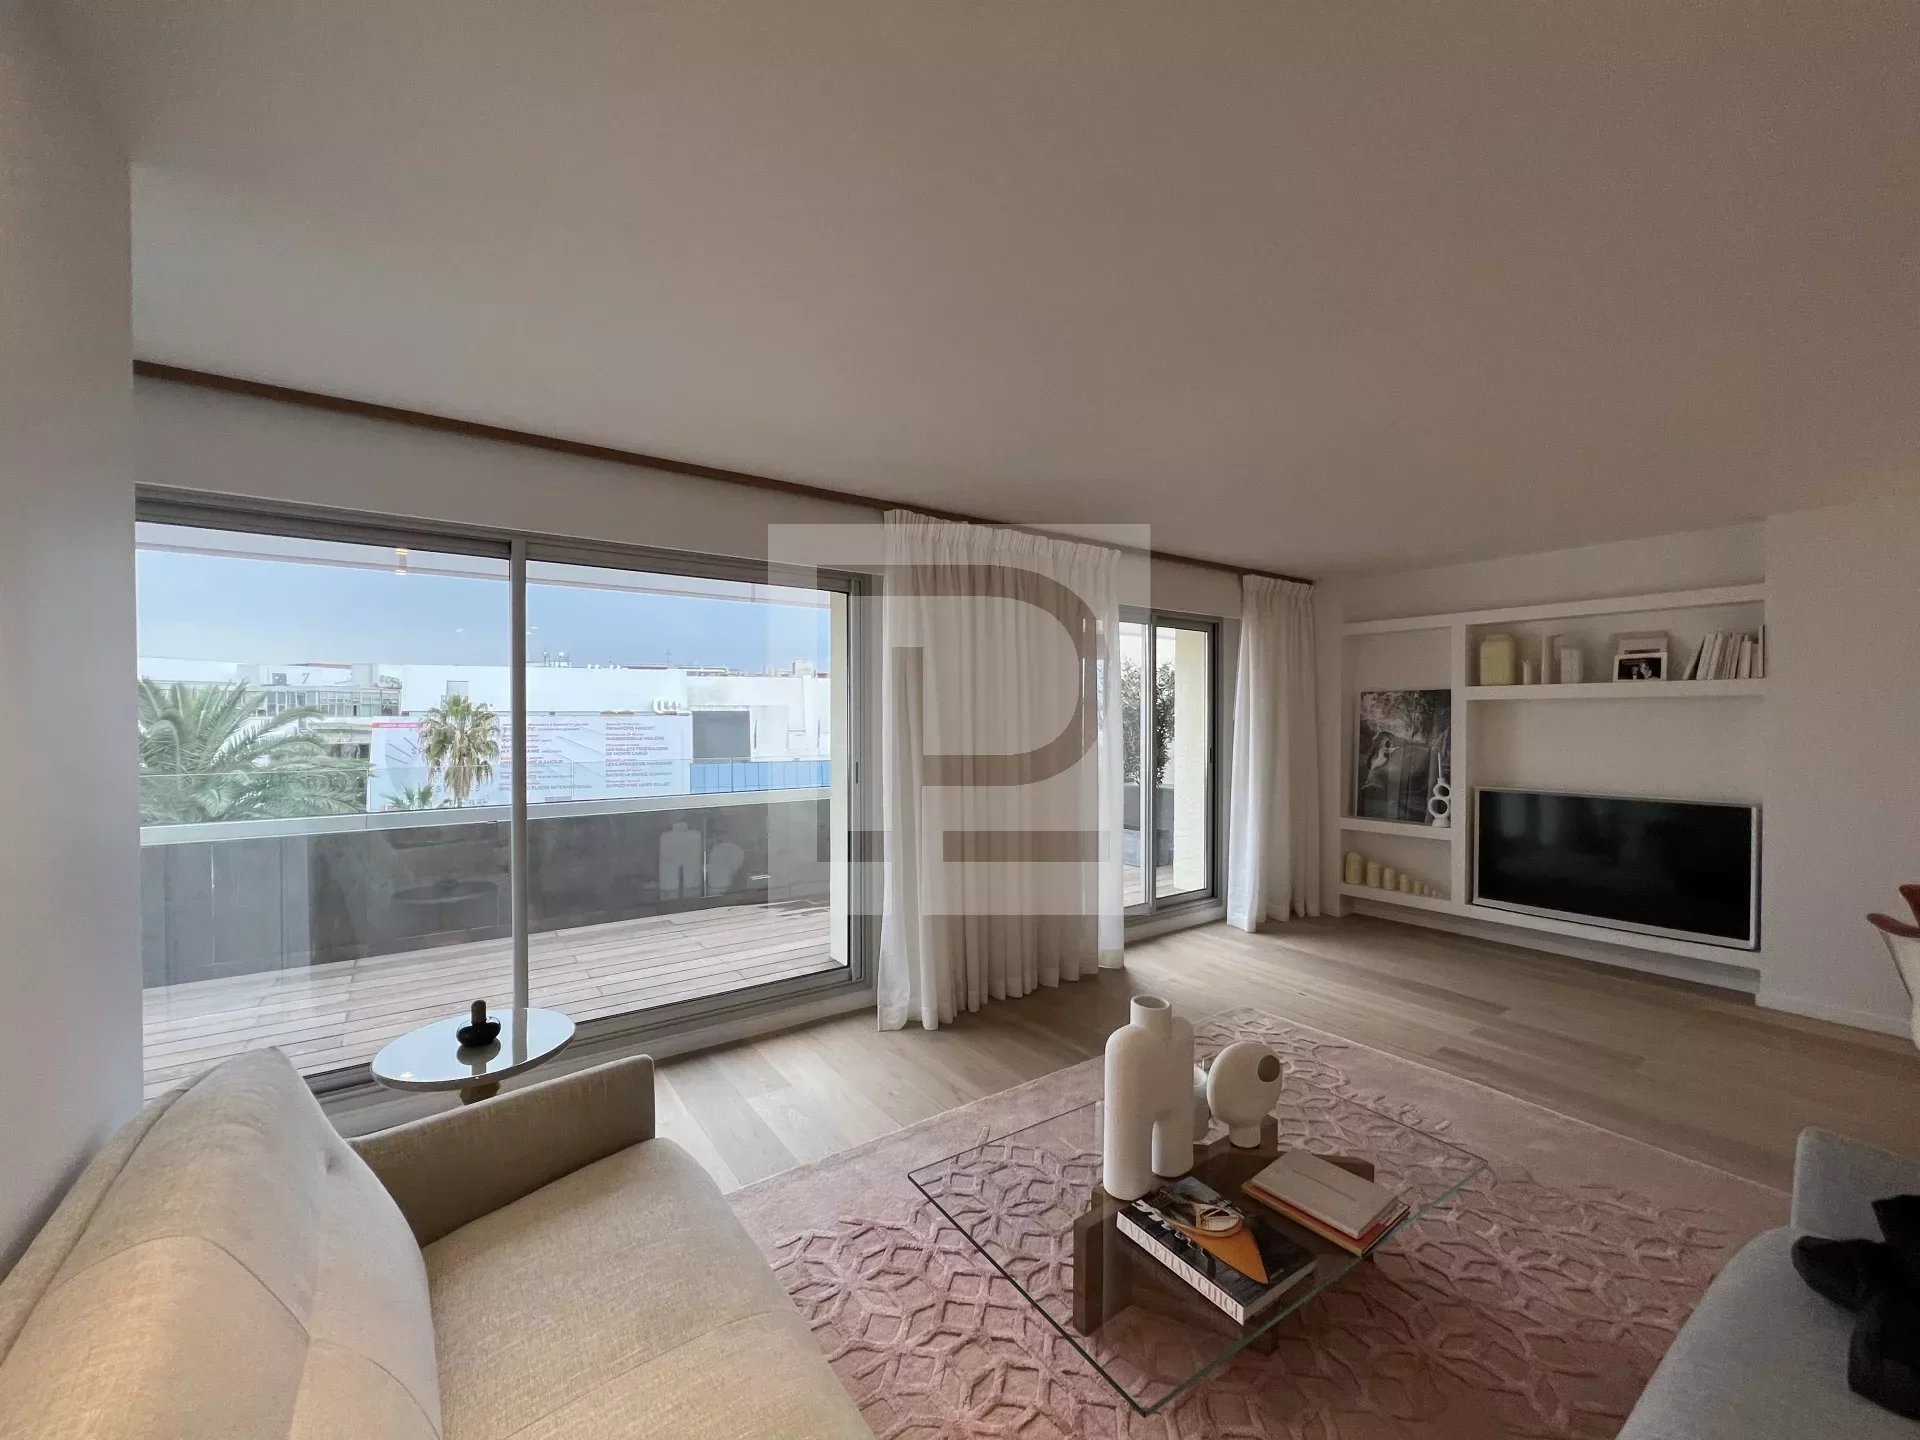 Cannes 3 bedroom's top floor apartment with panoramic sea view fully renovated